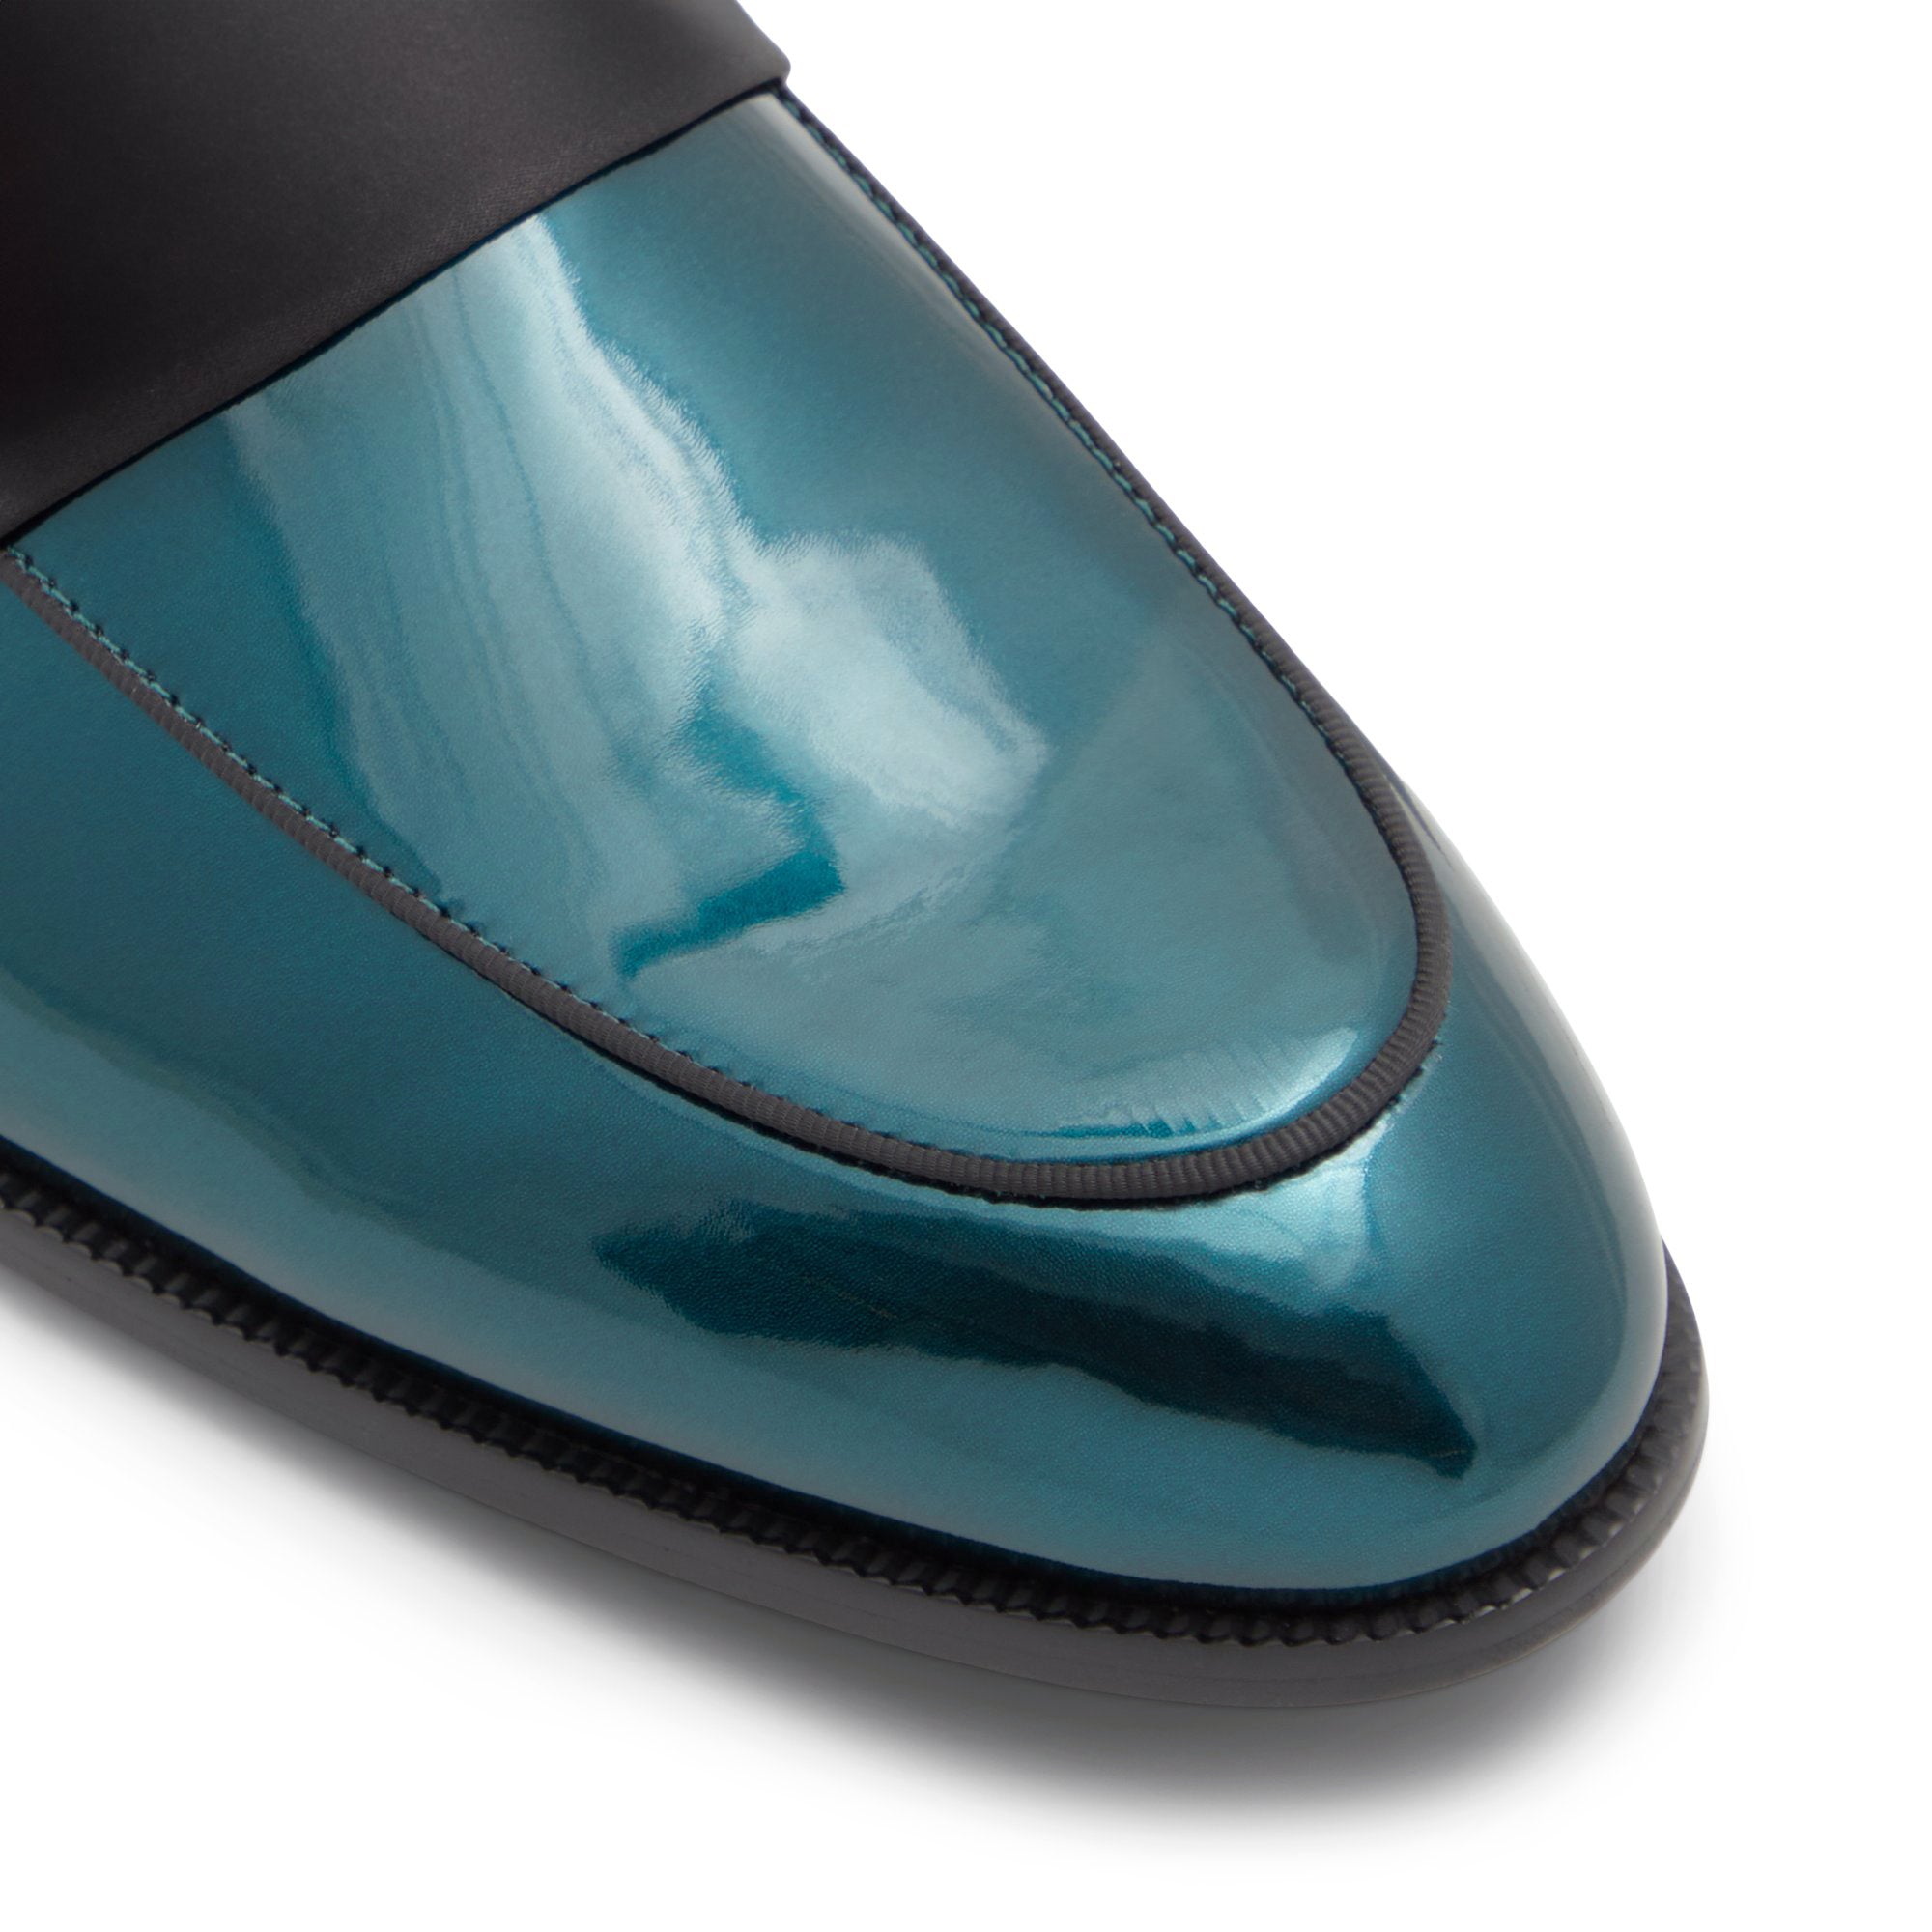 Turquoise Black Strap Loafers